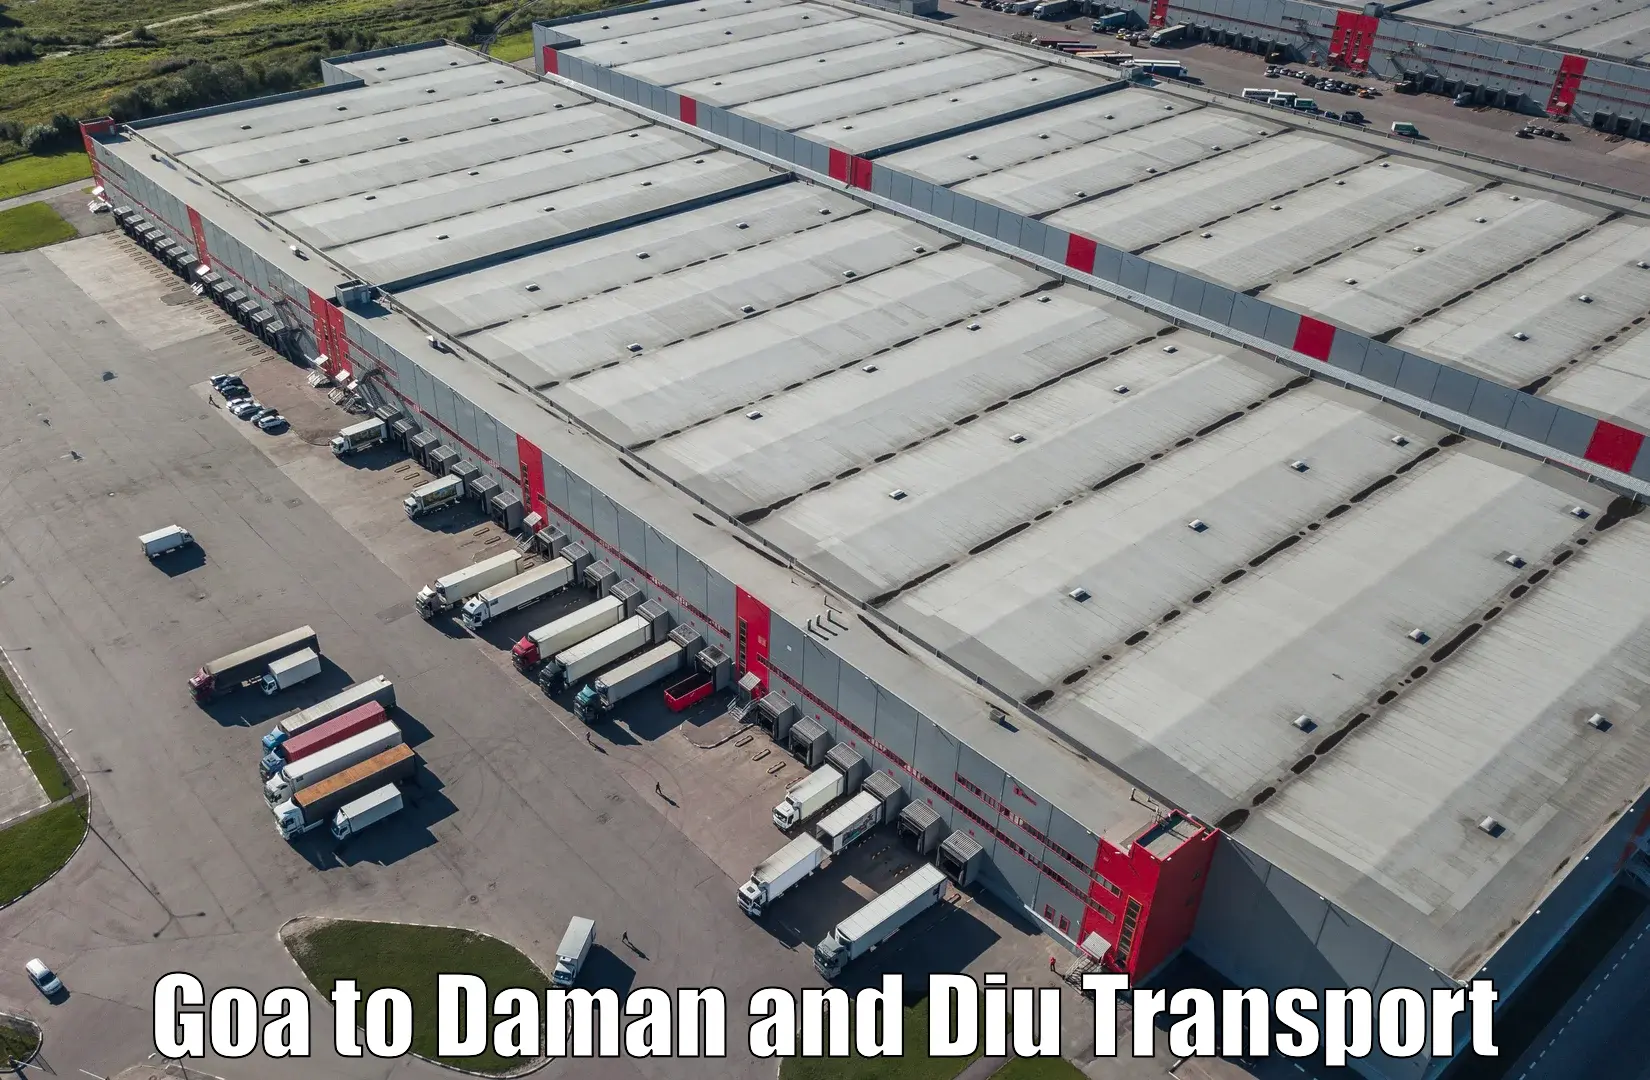 Commercial transport service Goa to Daman and Diu